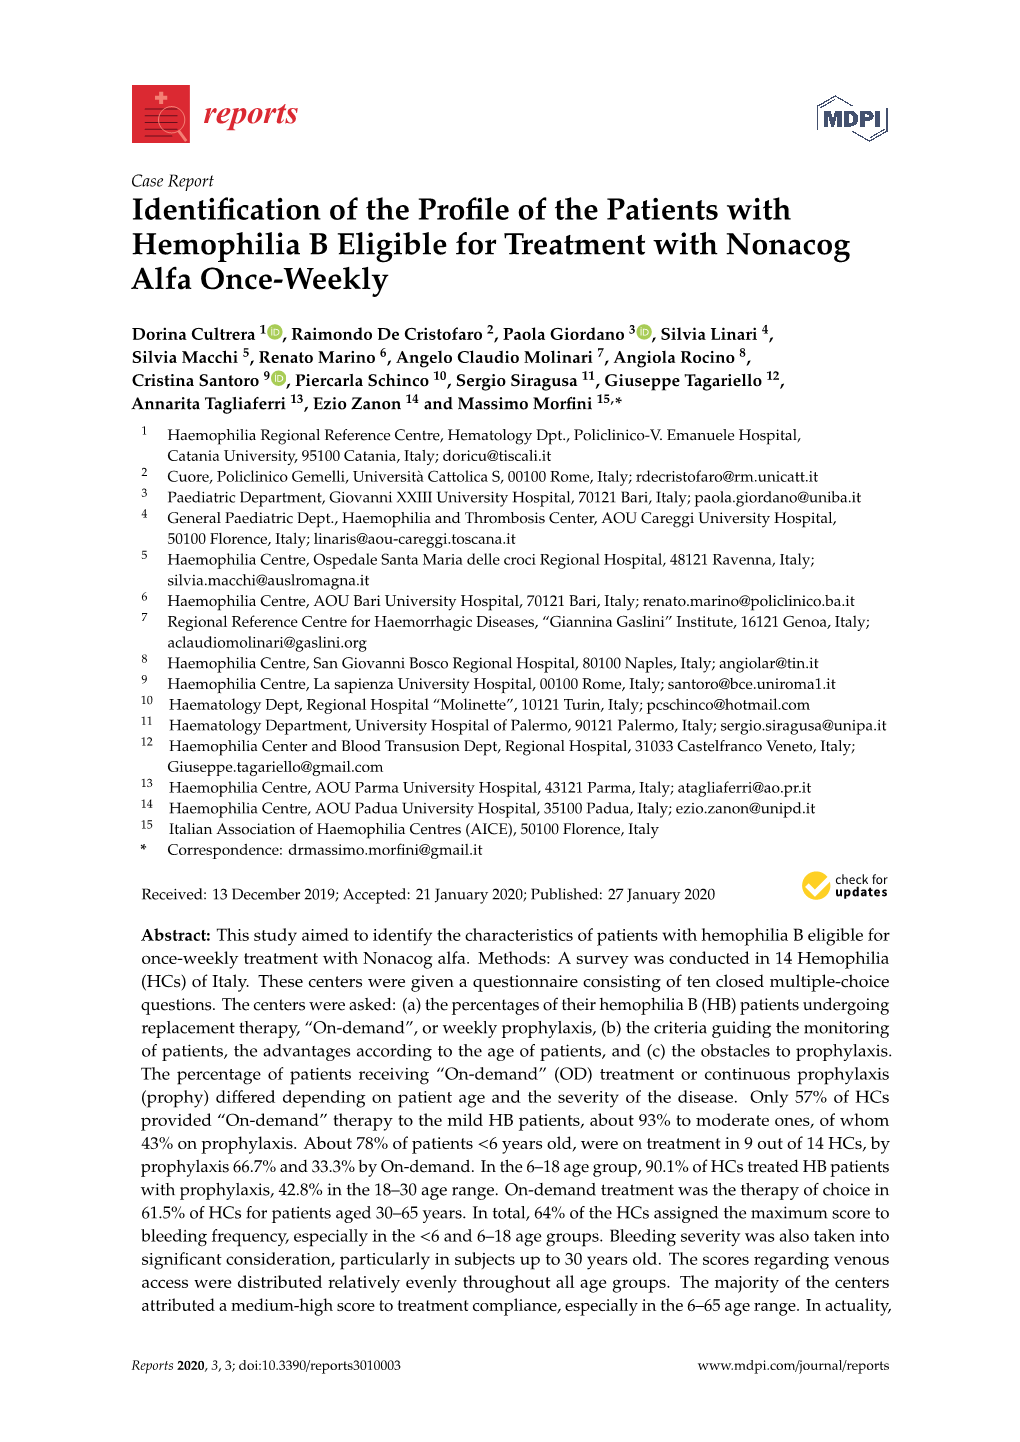 Identification of the Profile of the Patients with Hemophilia B Eligible for Treatment with Nonacog Alfa Once-Weekly